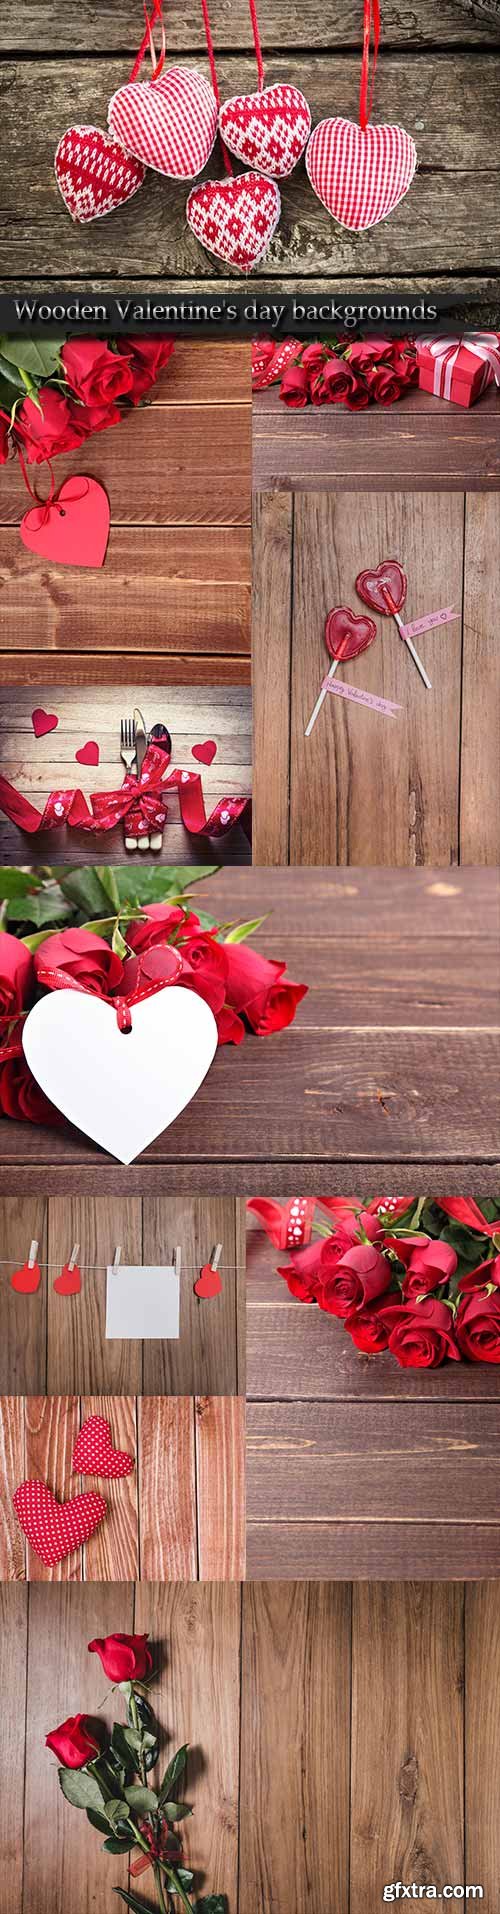 Wooden Valentine\'s day backgrounds